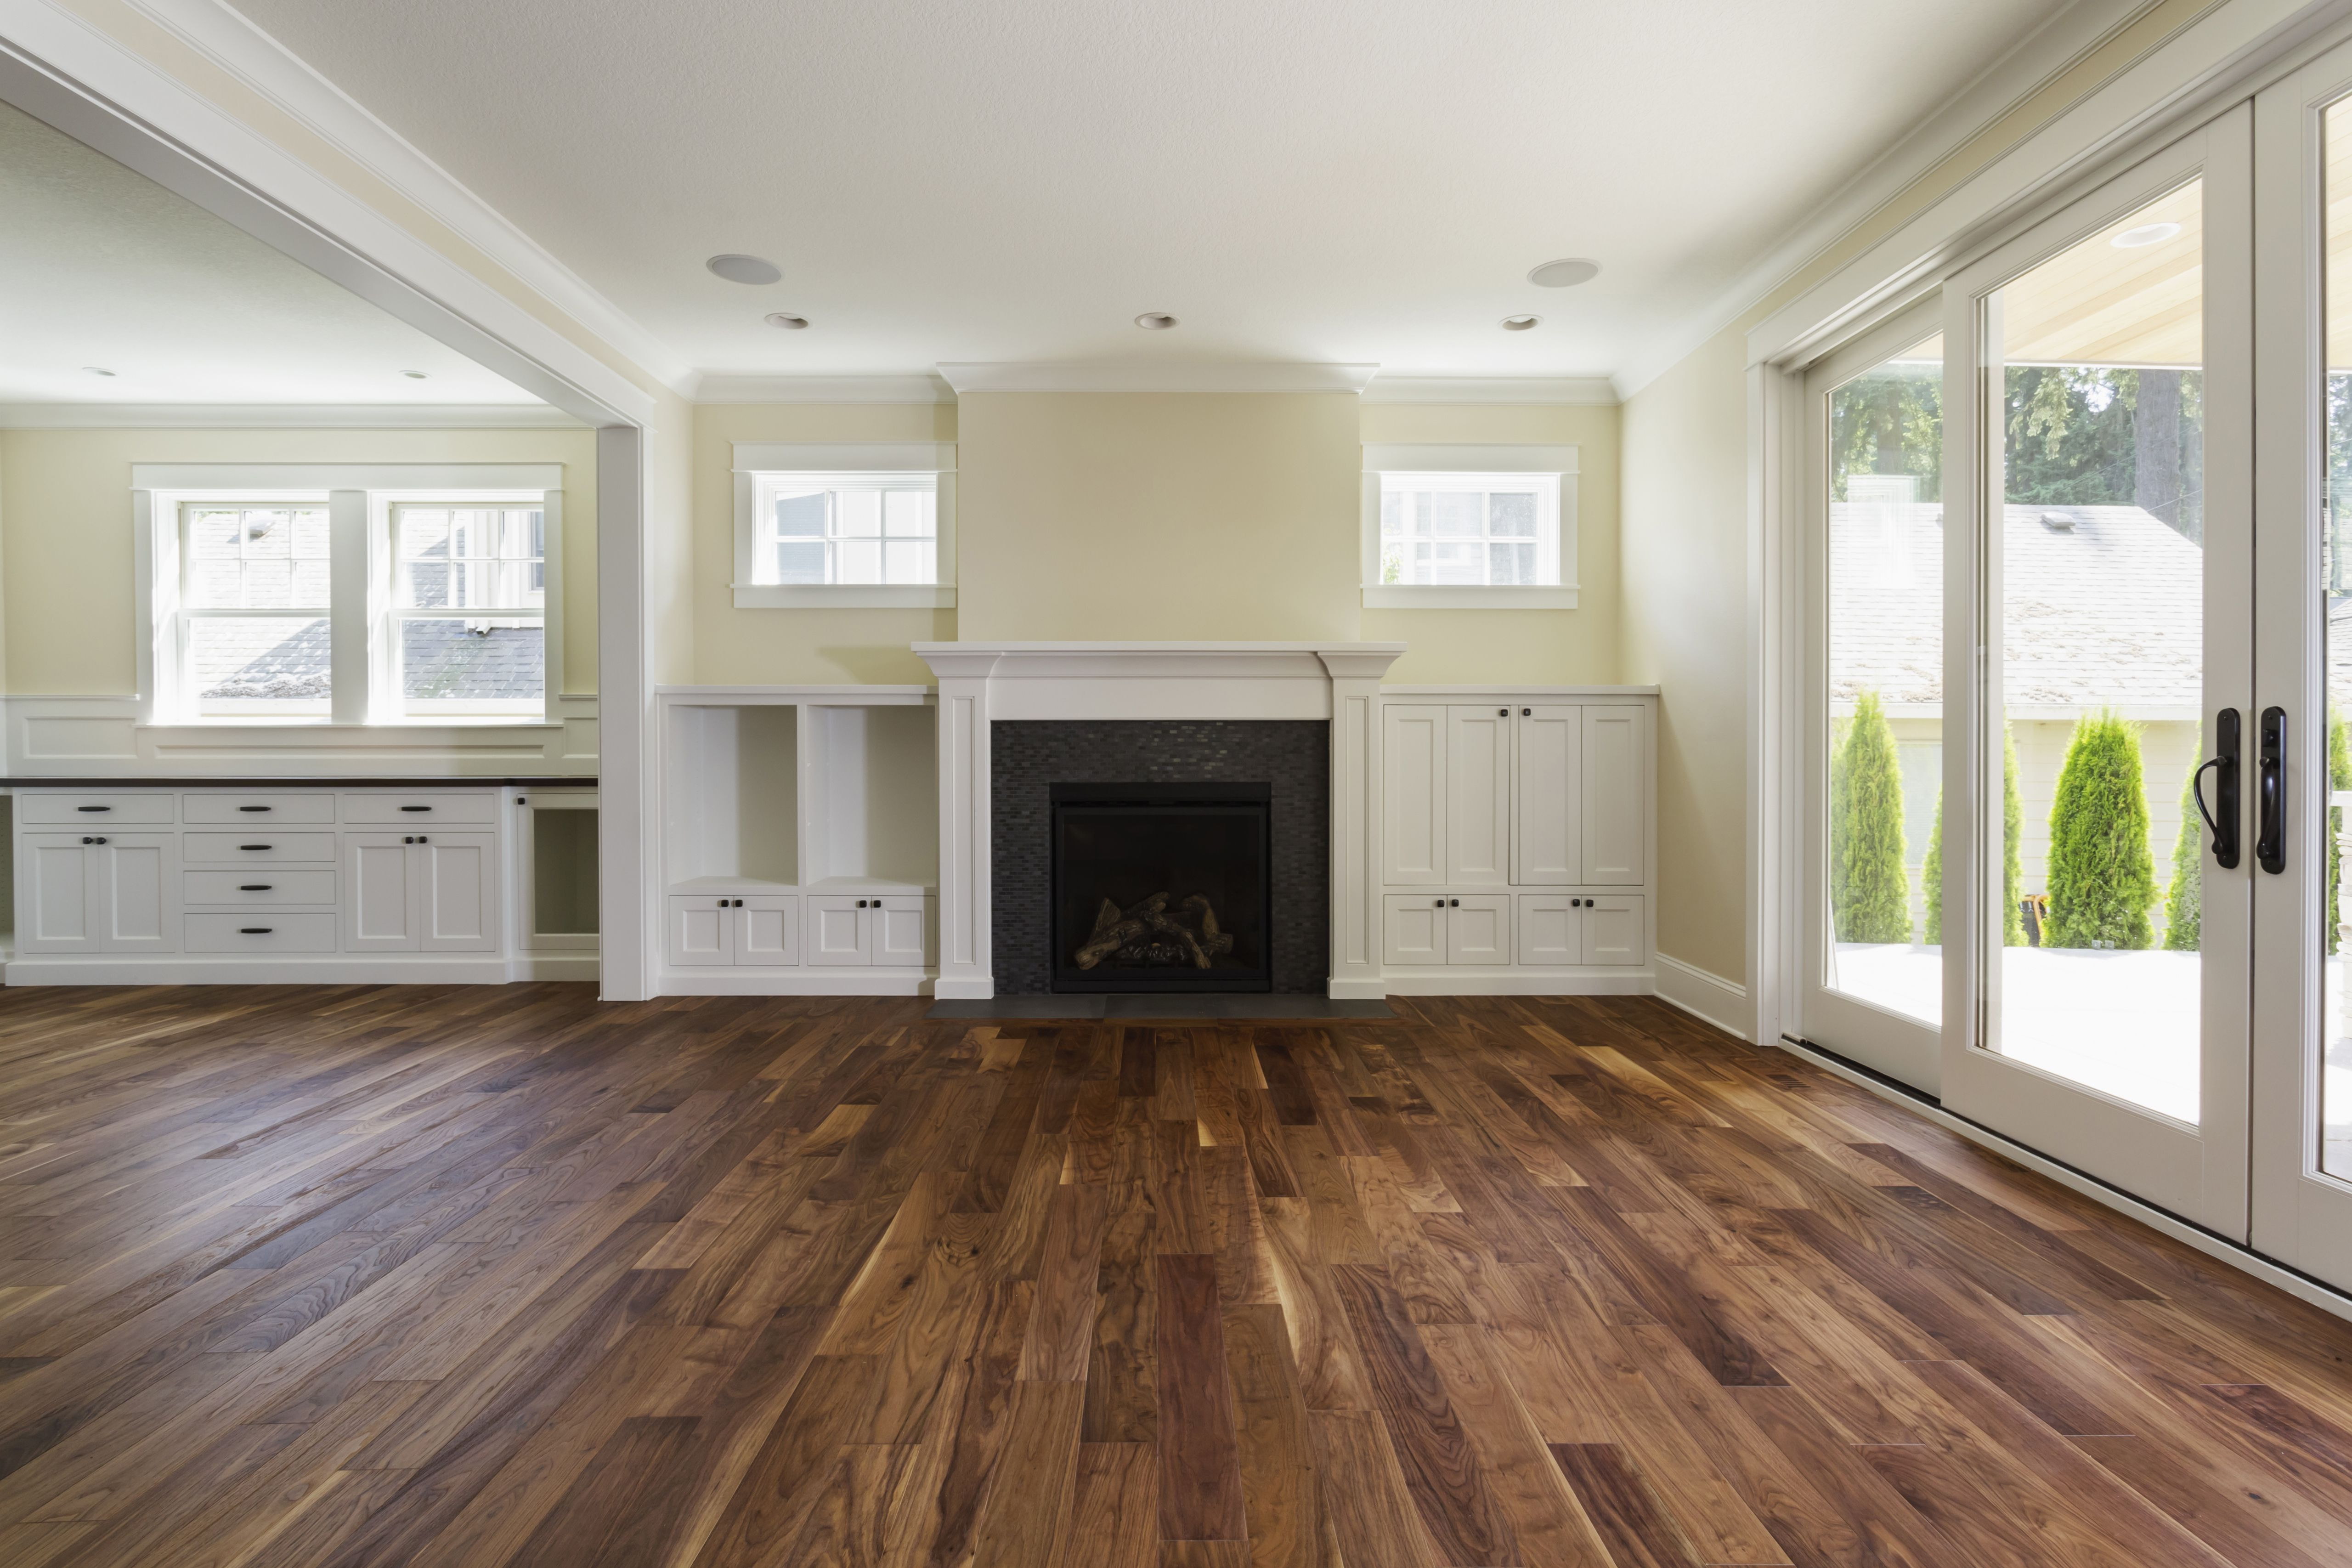 floor and decor hardwood flooring of the pros and cons of prefinished hardwood flooring with fireplace and built in shelves in living room 482143011 57bef8e33df78cc16e035397